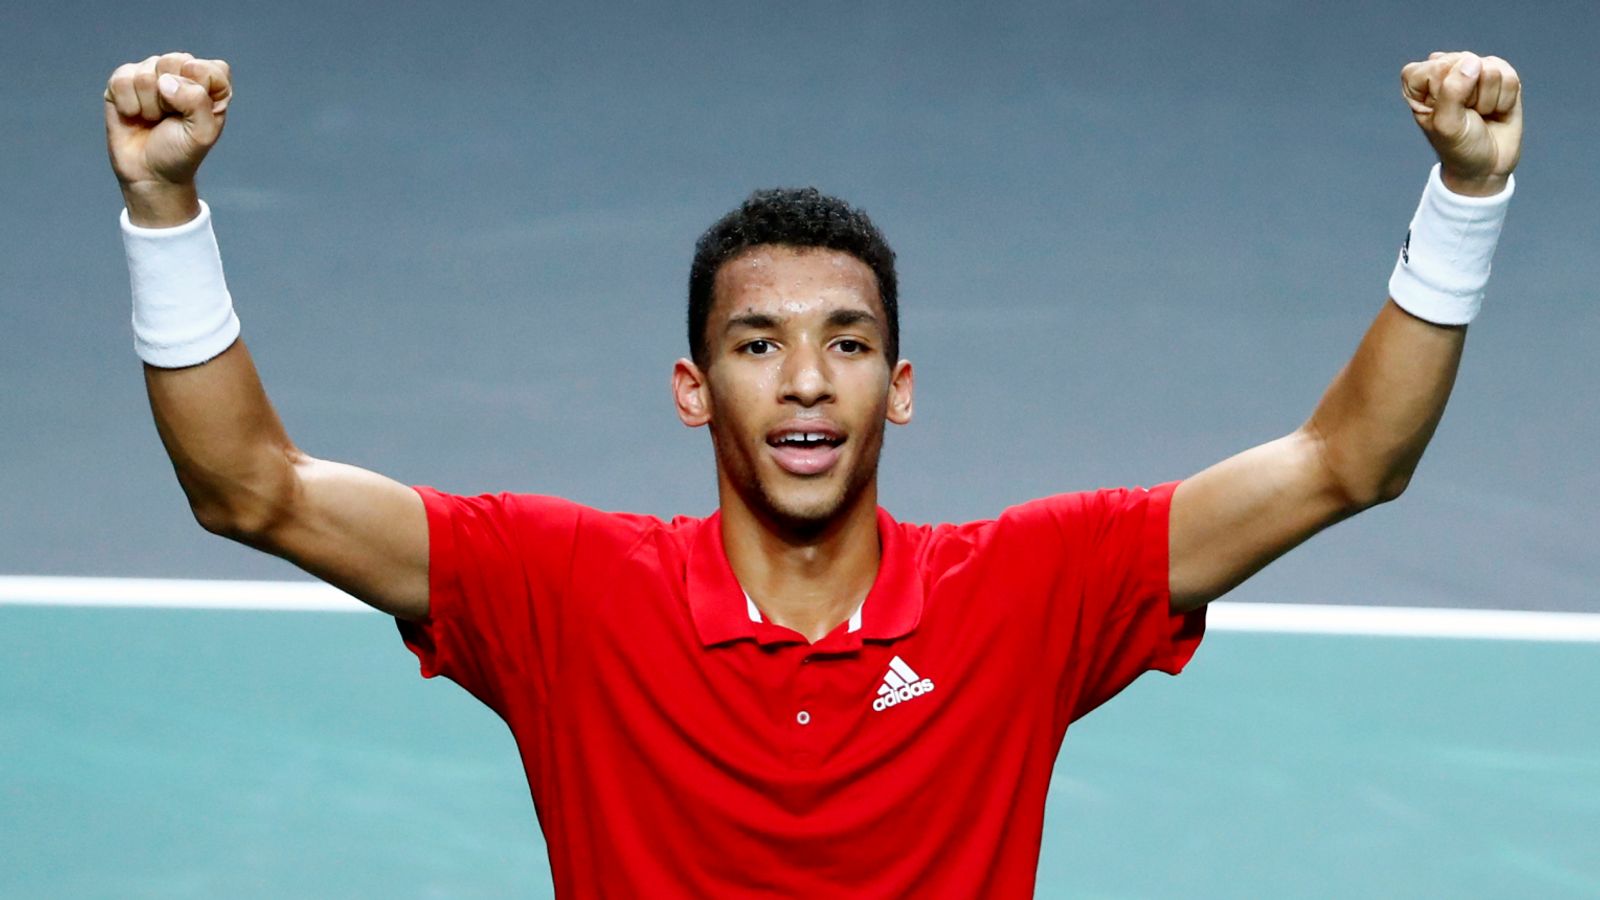 Davis Cup: Felix Auger-Aliassime hails 'dream come true' as Canada lift trophy for first time in their history